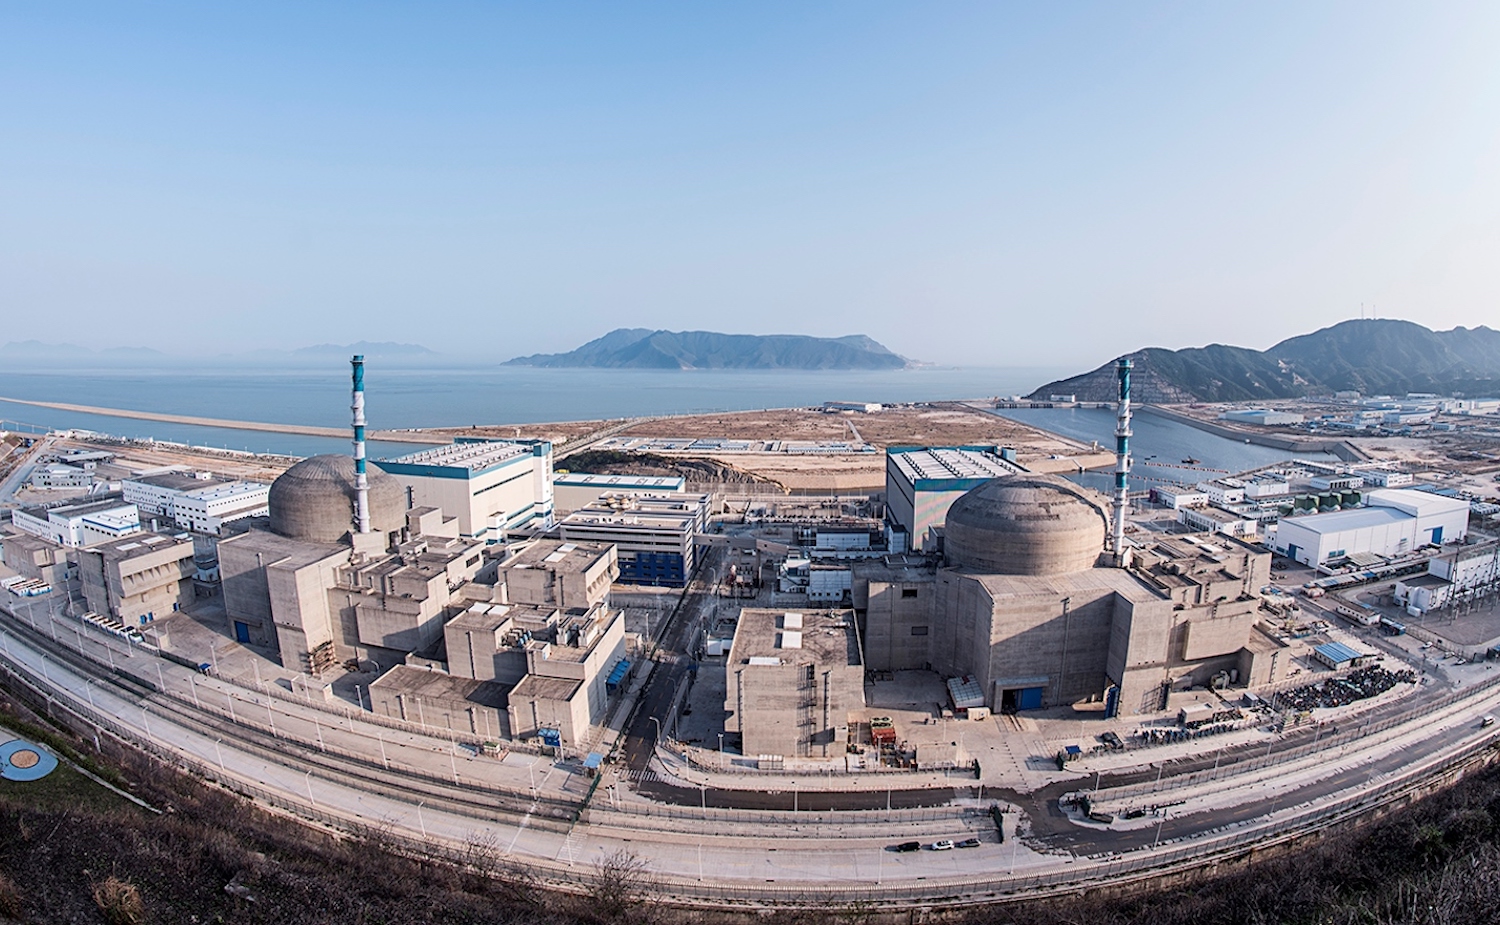 First made-in-China nuclear reactor online